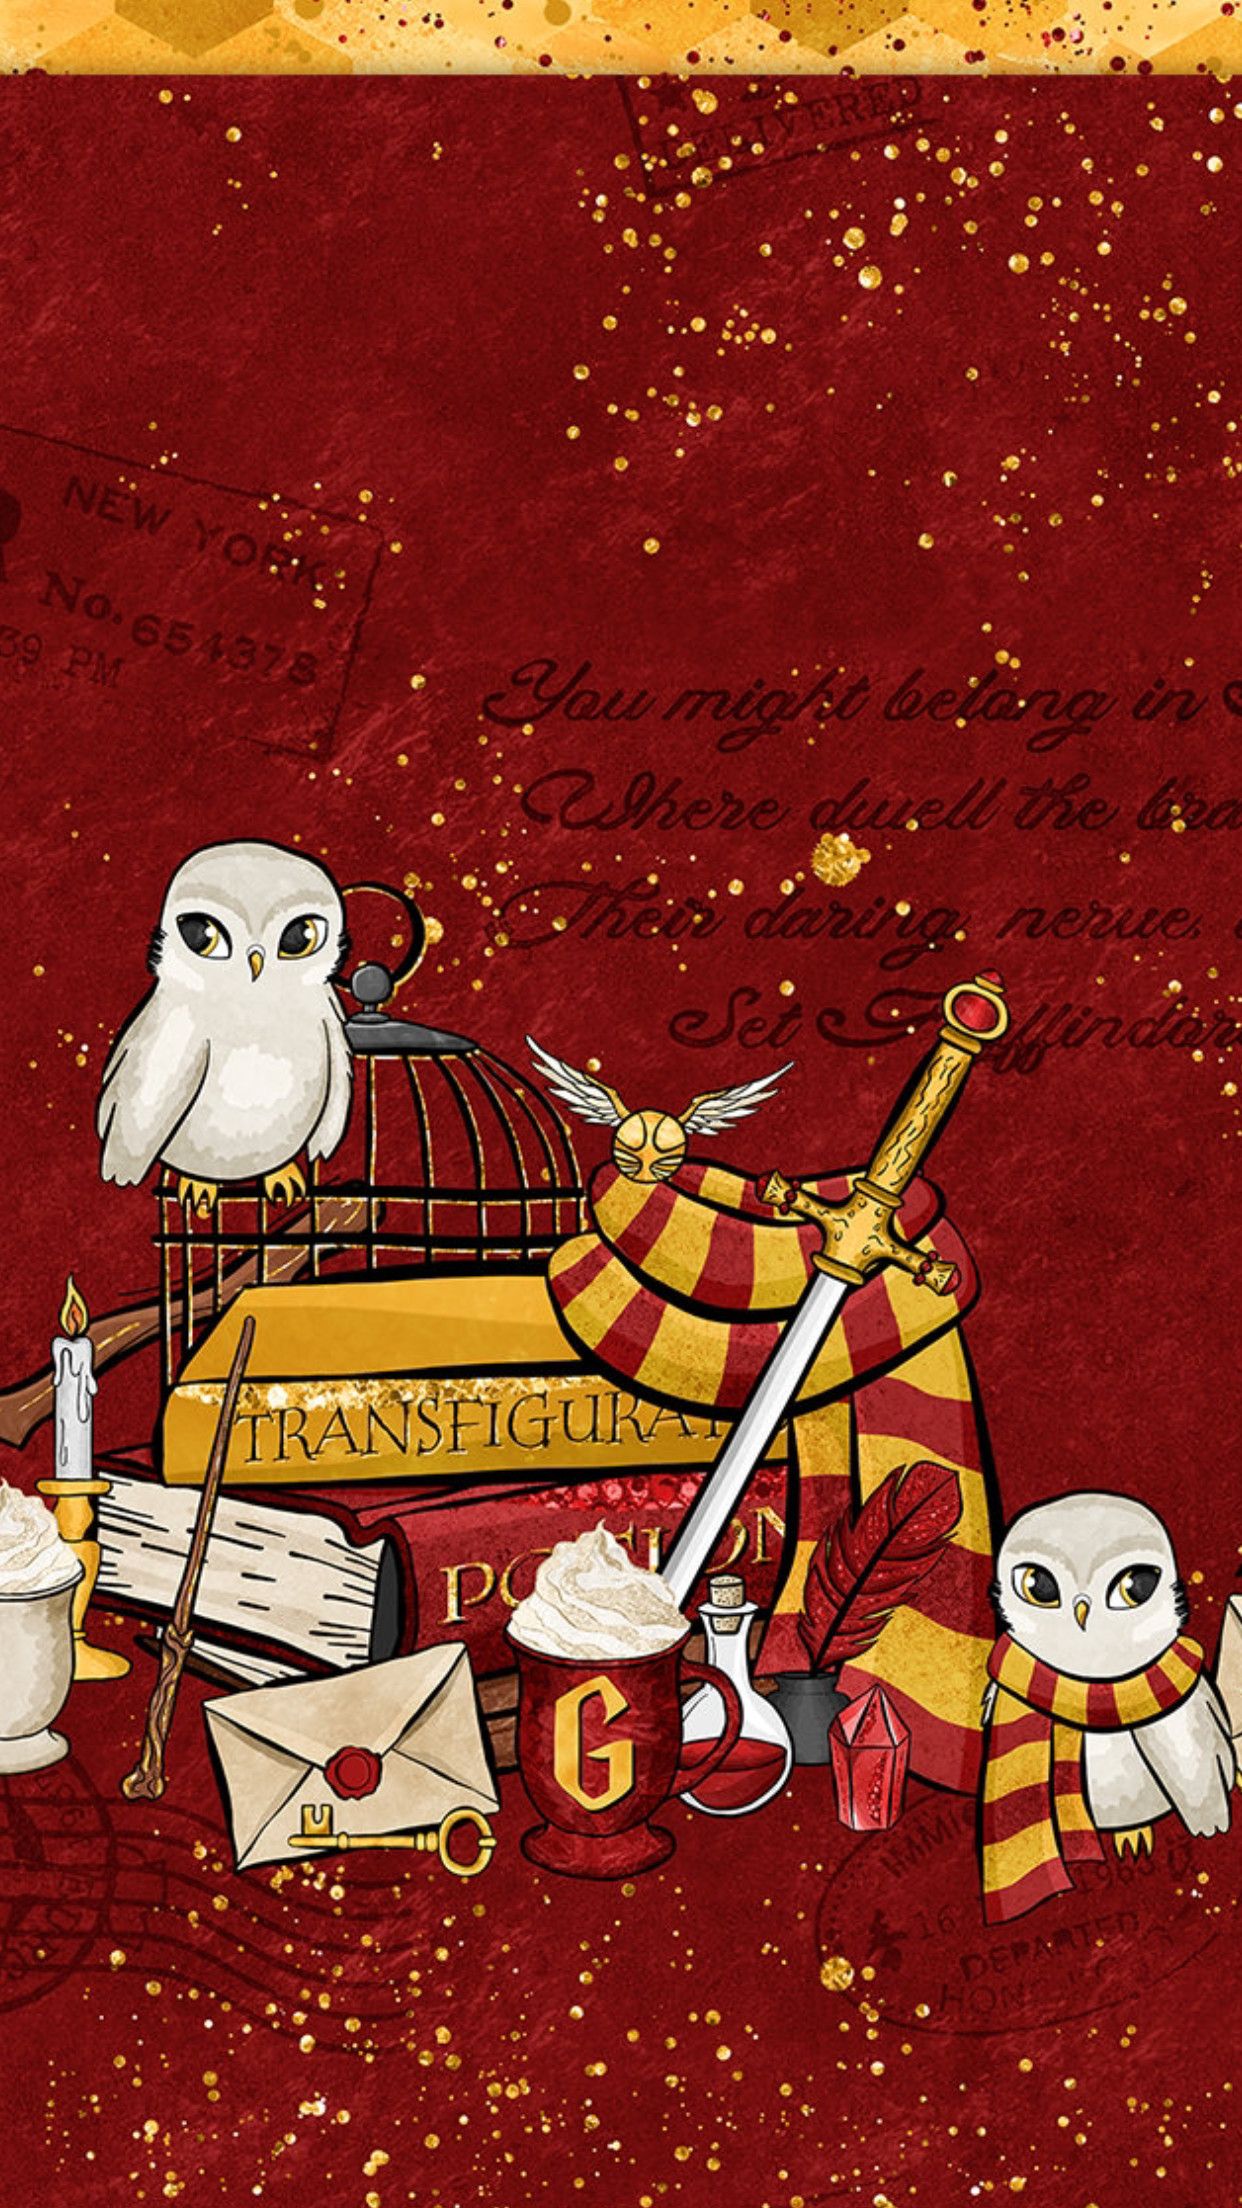 Recklessly: iPhone Harry Potter Owl Wallpaper